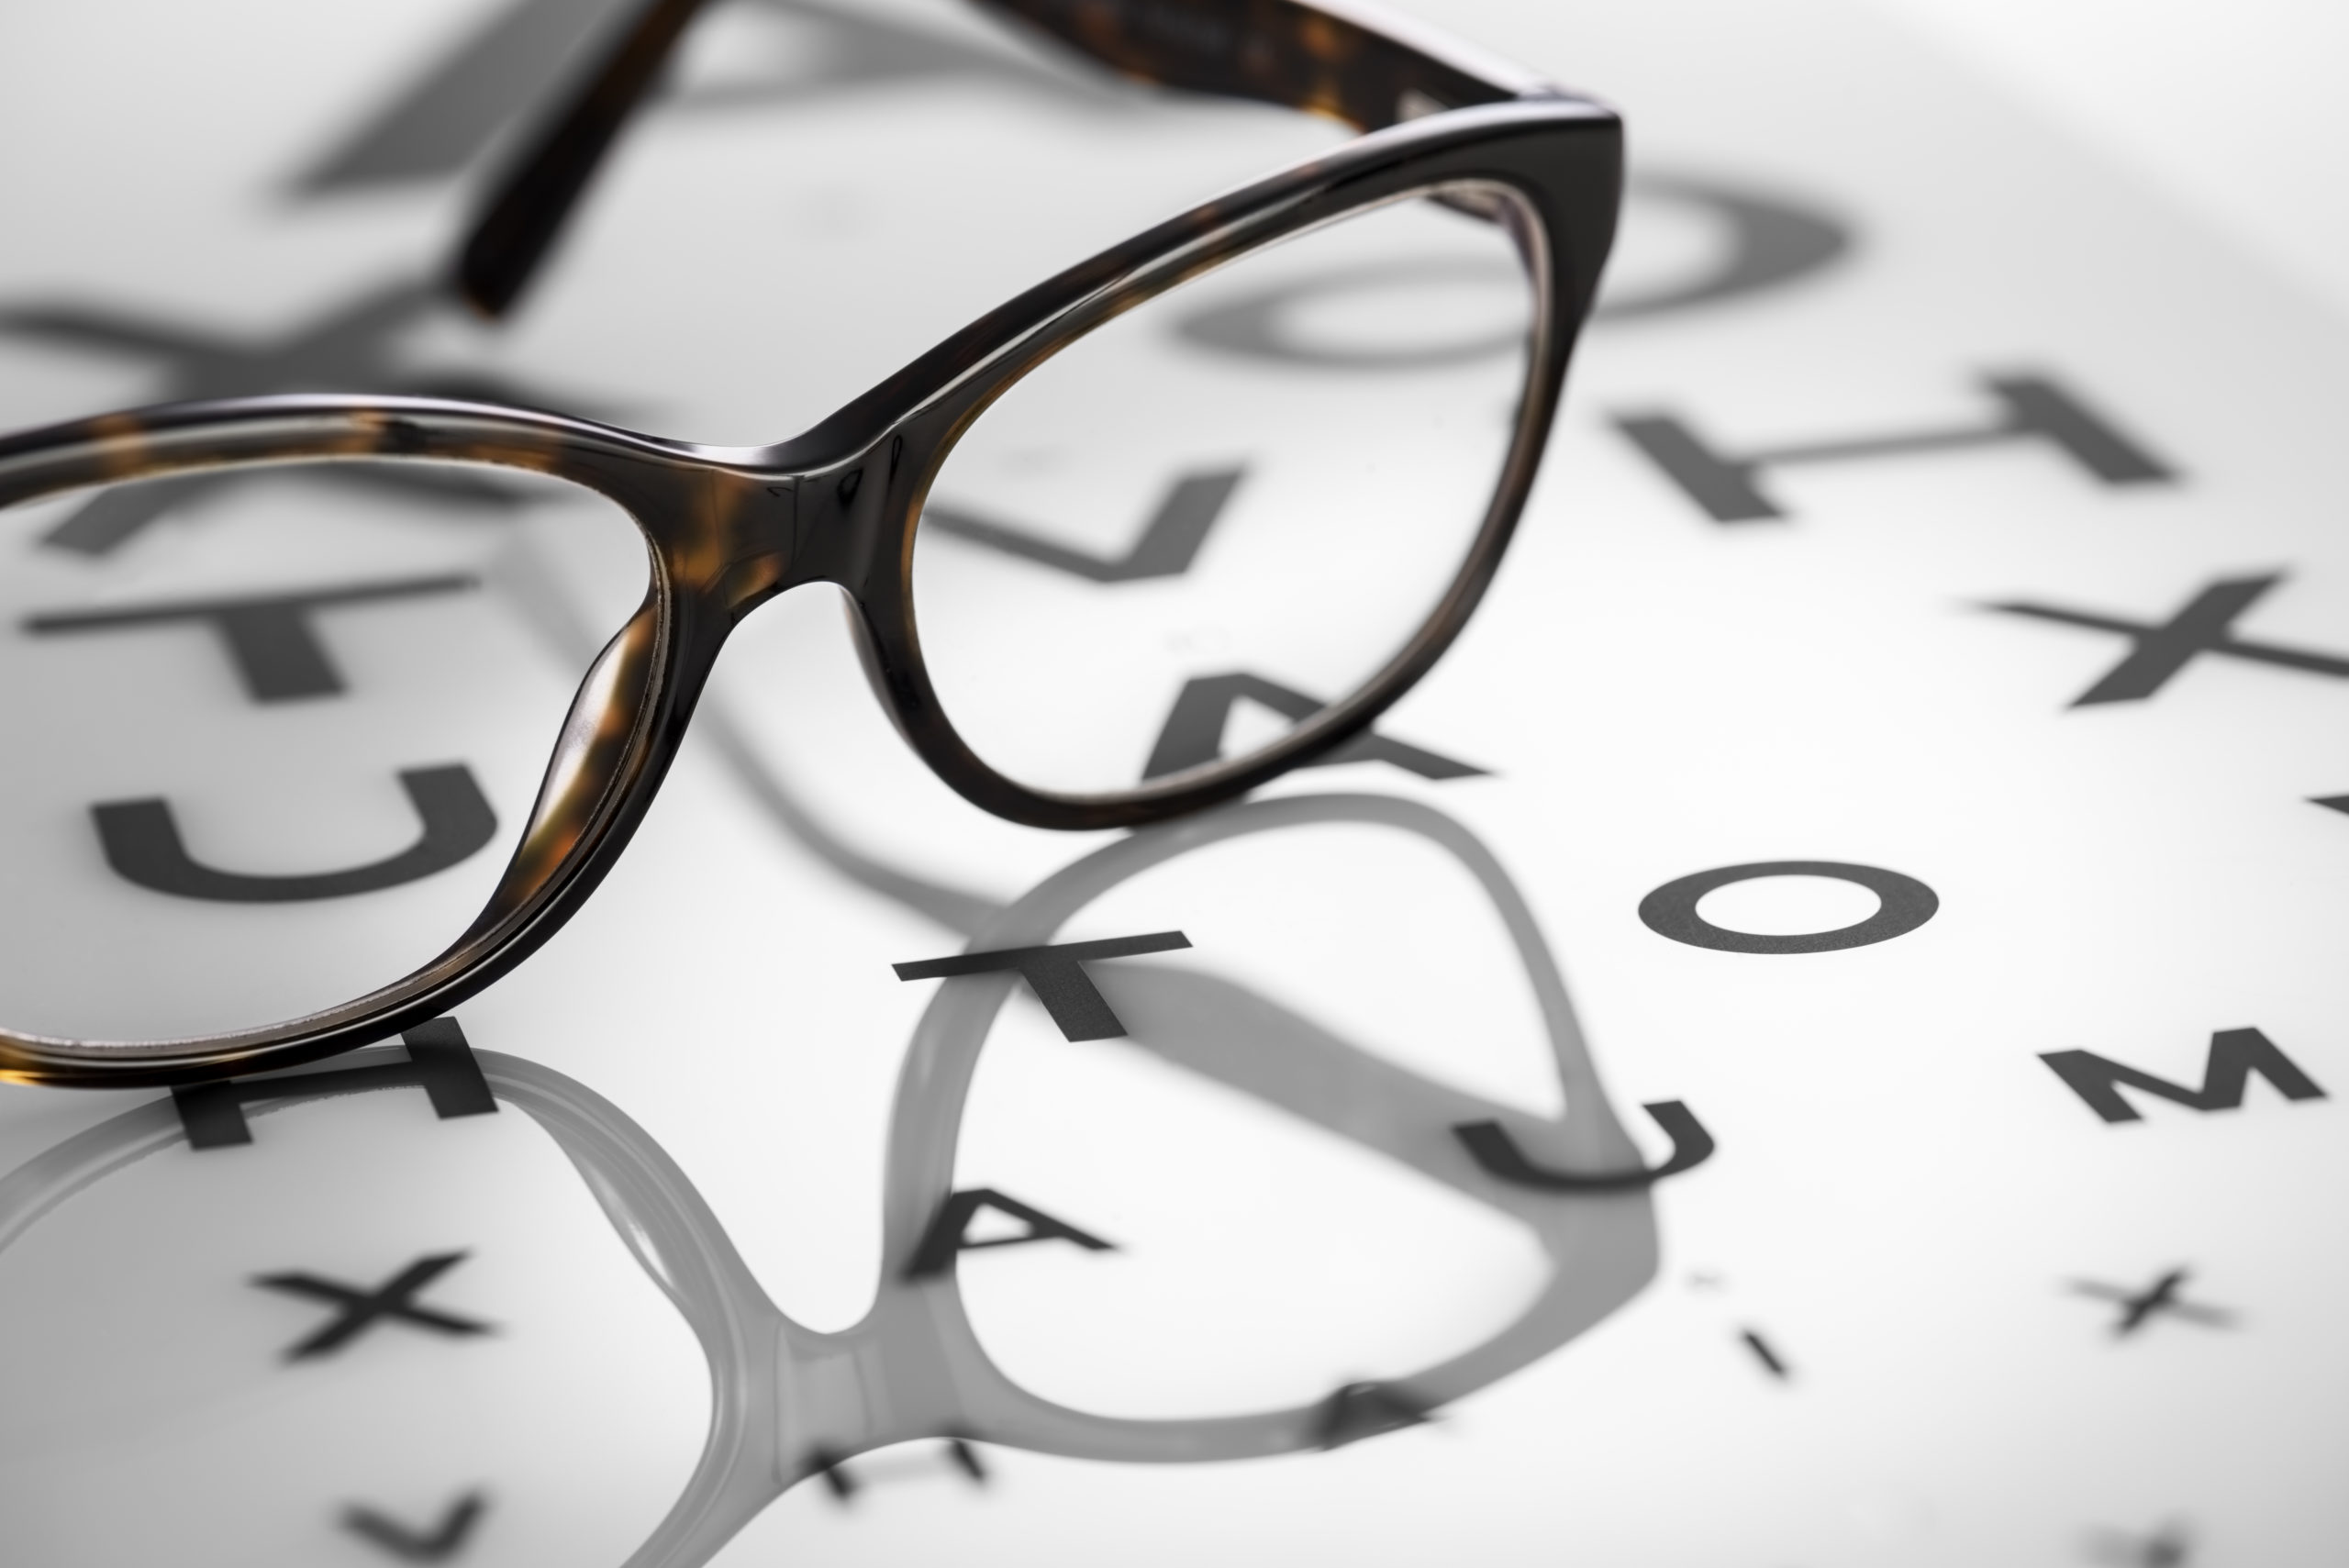 Brown plastic reading spectacles are lying on an alphabetic sight chart. The chart is made of thick white plastic with black letters that get smaller in size as they go down the chart. There is a pool of light surrounding the glasses.